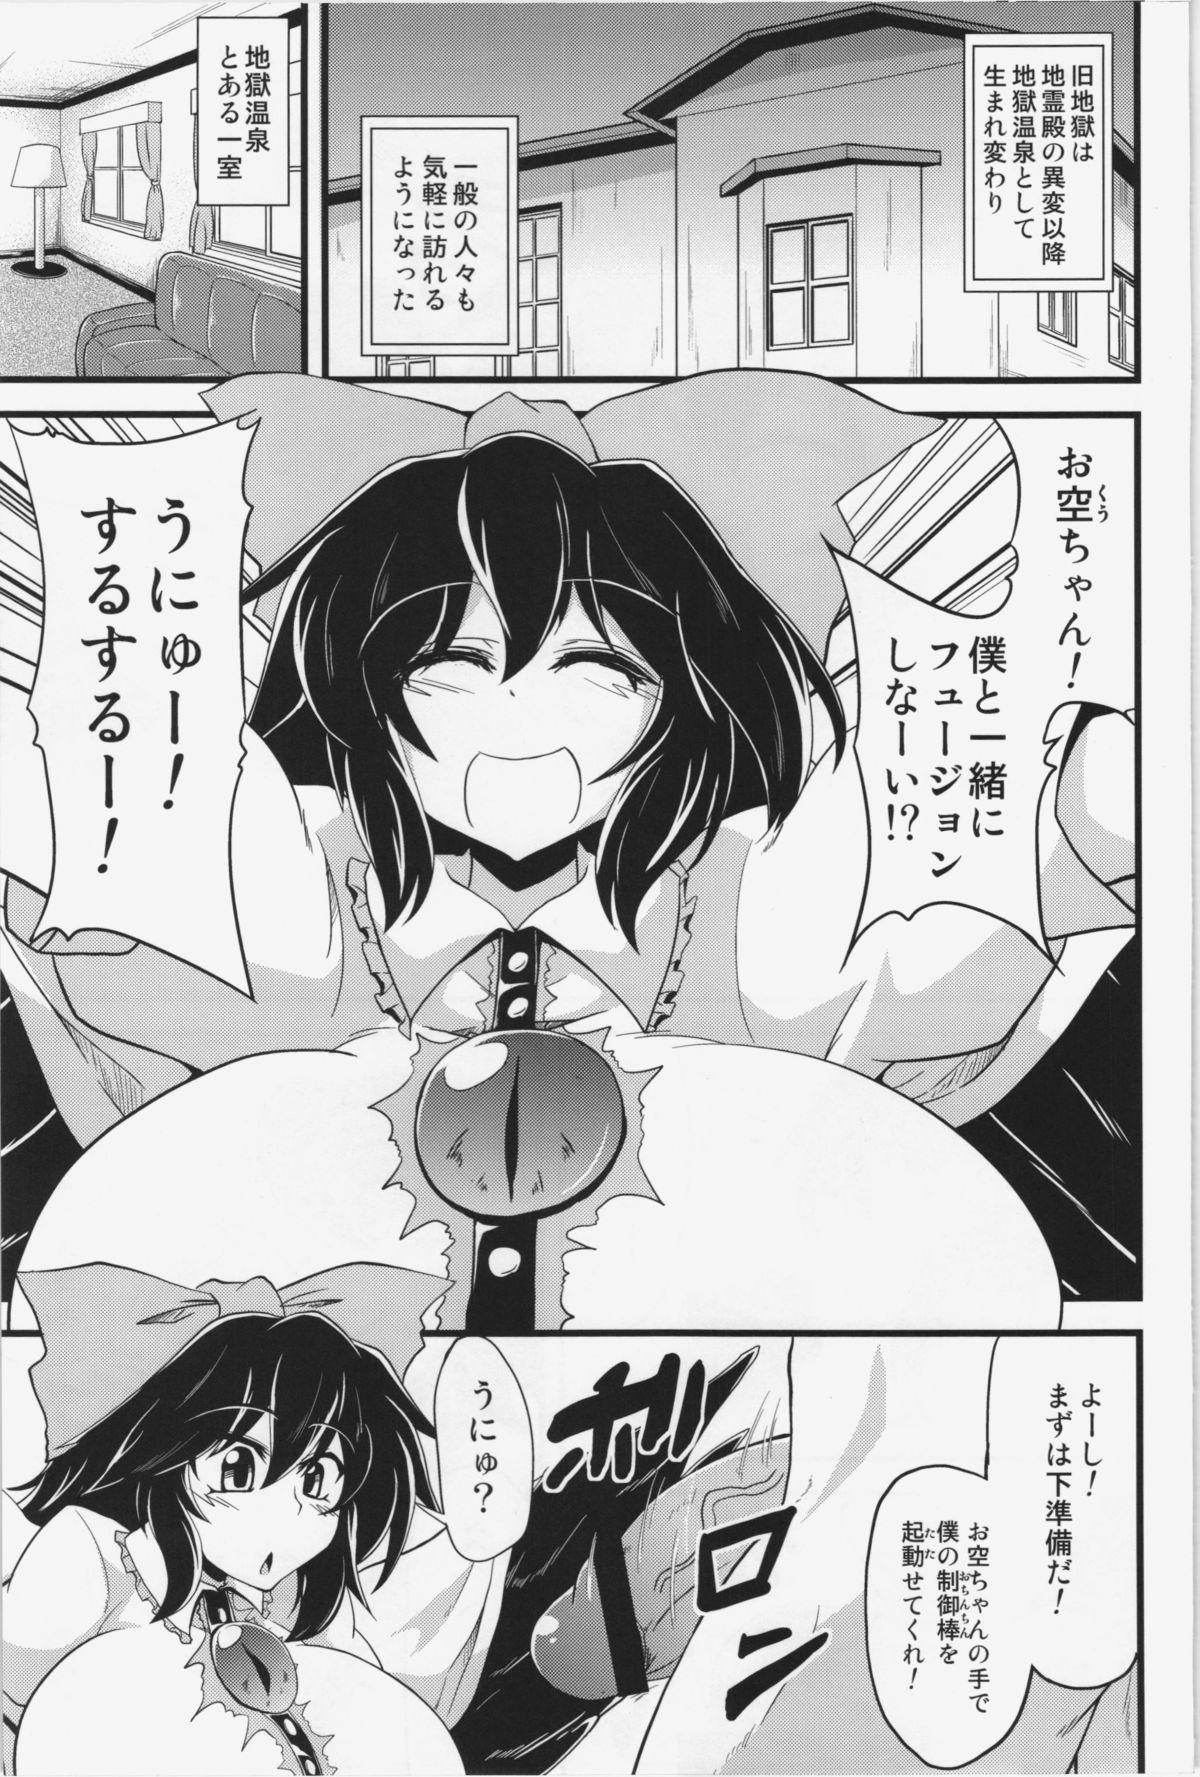 Self Let's Nuclear Fusion - Touhou project Caliente - Page 3